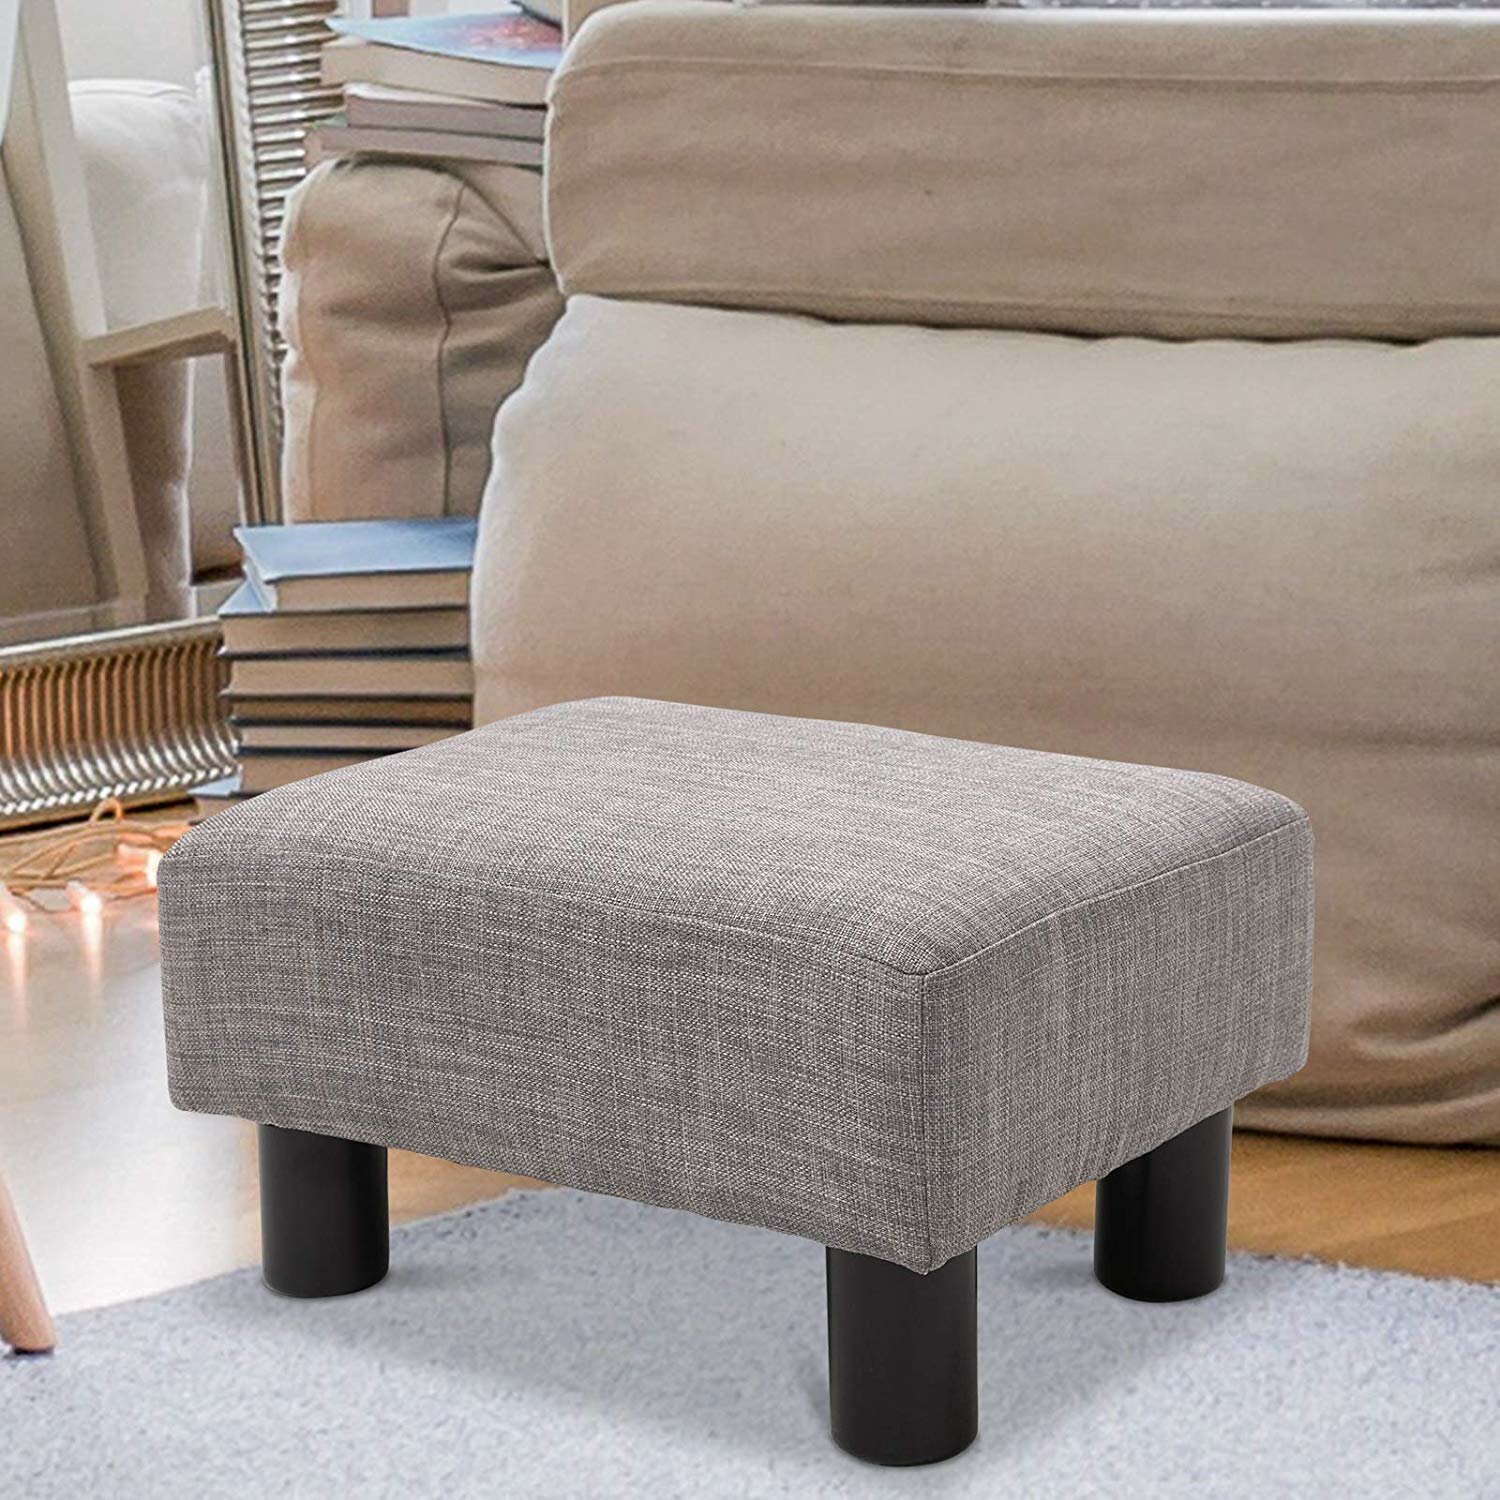 LARGE FOOTSTOOL FLAT TOP with deep buttoned border Linen Upholstery Fabric 